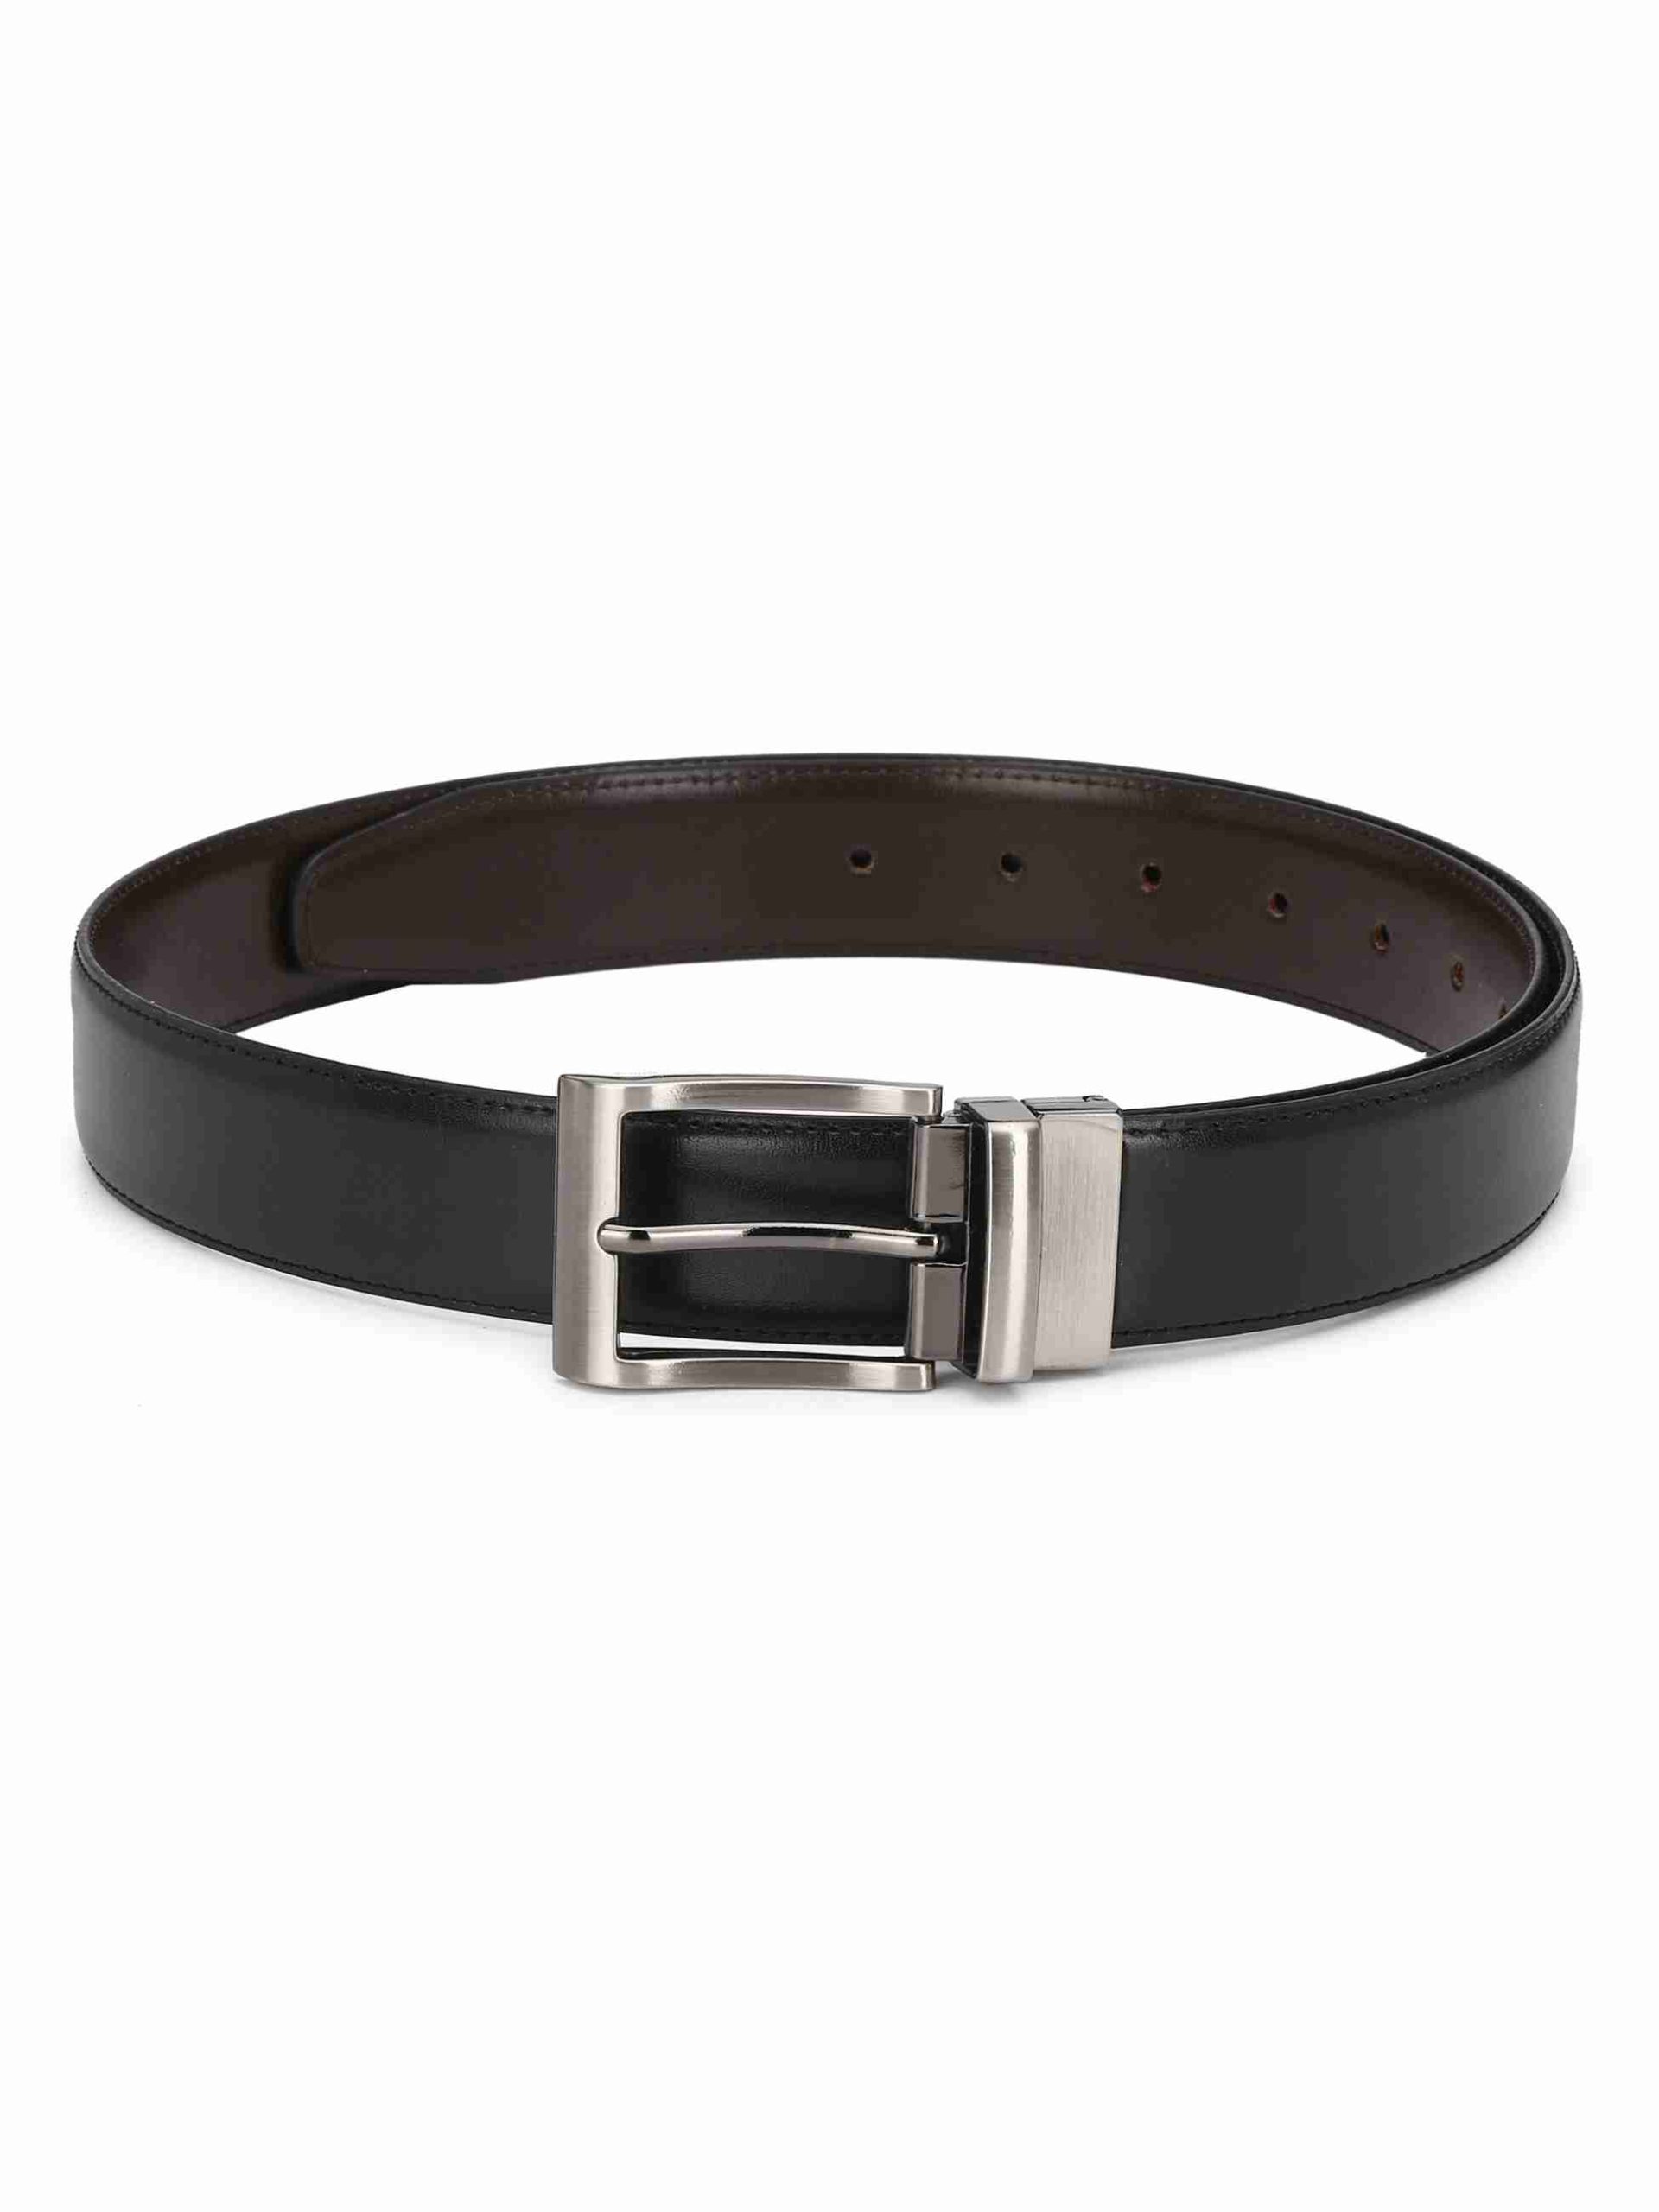 SOLID DESIGN PU REVERSIBLE BELT WITH TURNING BUCKLE - CALVADOSS